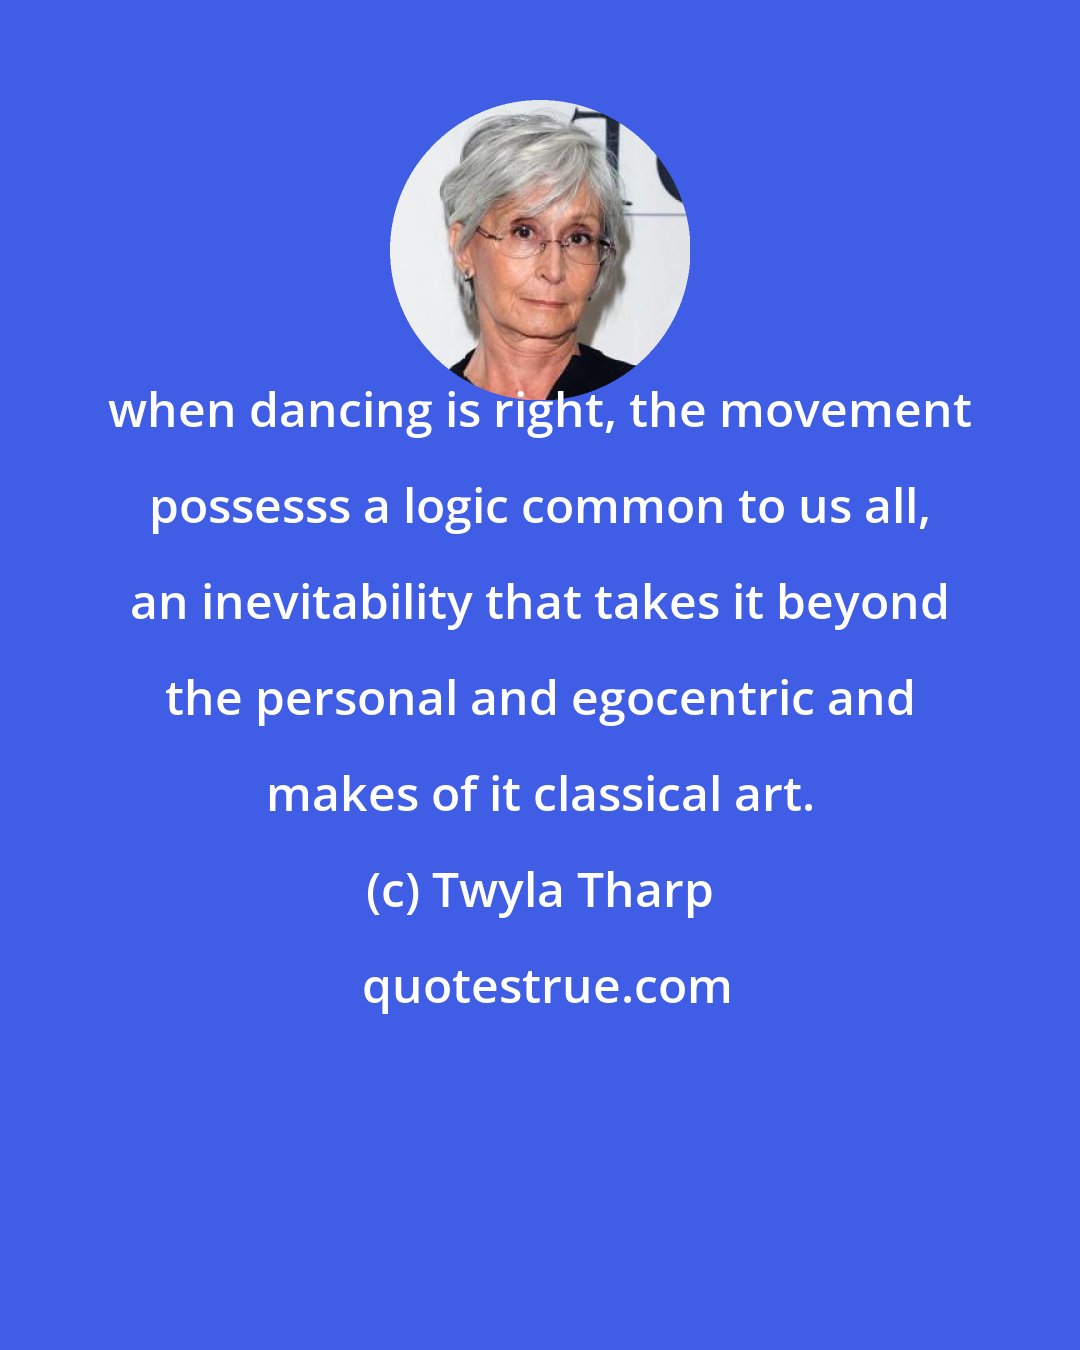 Twyla Tharp: when dancing is right, the movement possesss a logic common to us all, an inevitability that takes it beyond the personal and egocentric and makes of it classical art.